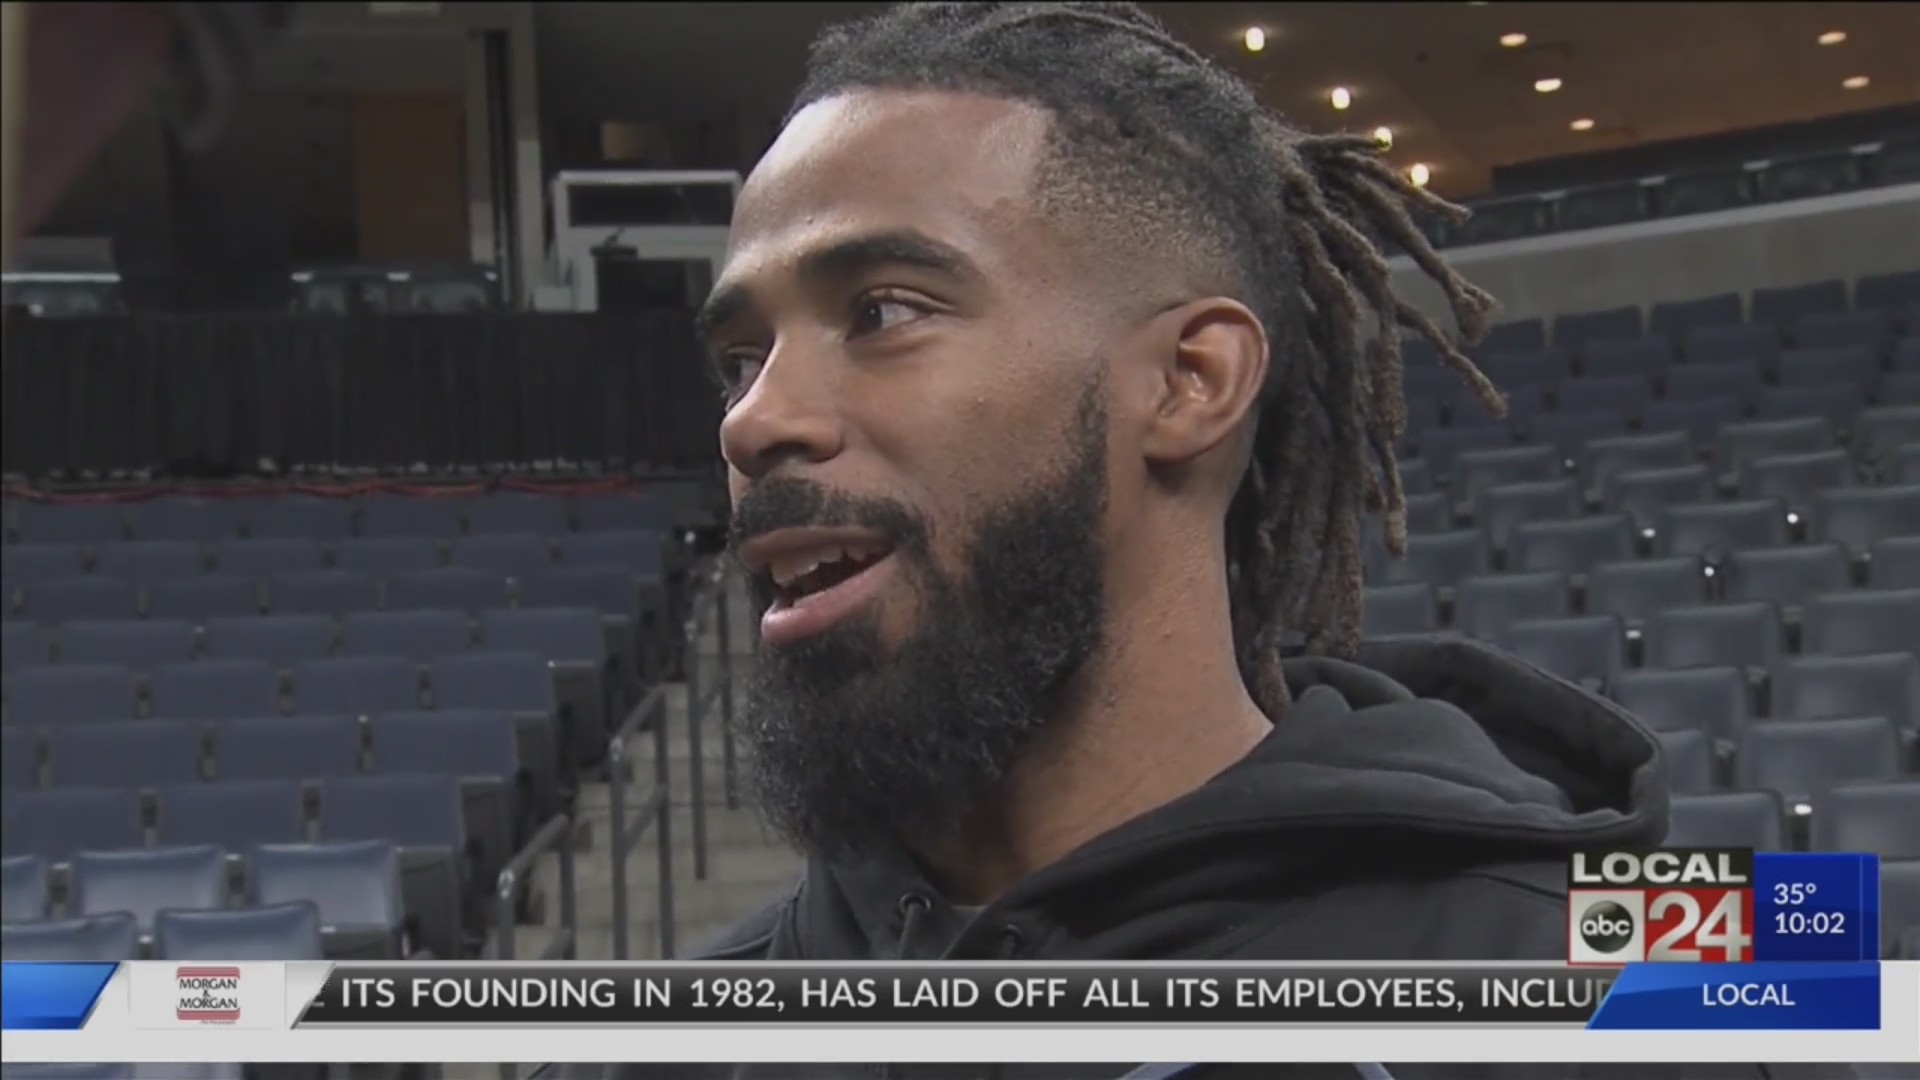 Thumbnail for the video titled "Fans welcome former Grizzlies star Mike Conley back to FedExForum"